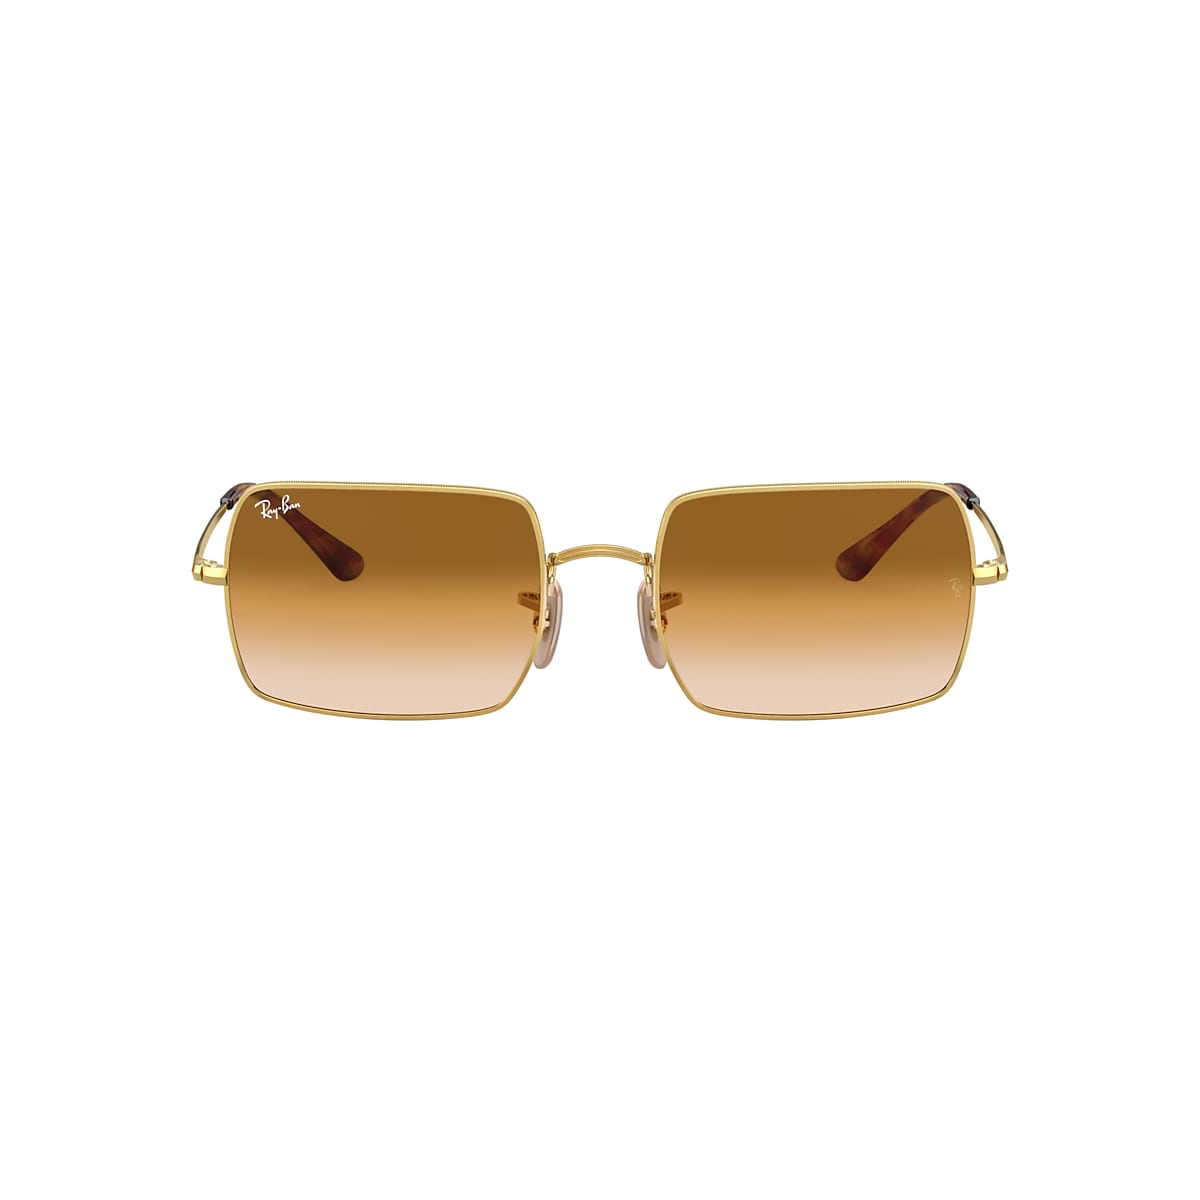 Ray-Ban square sunglasses in gold/brown